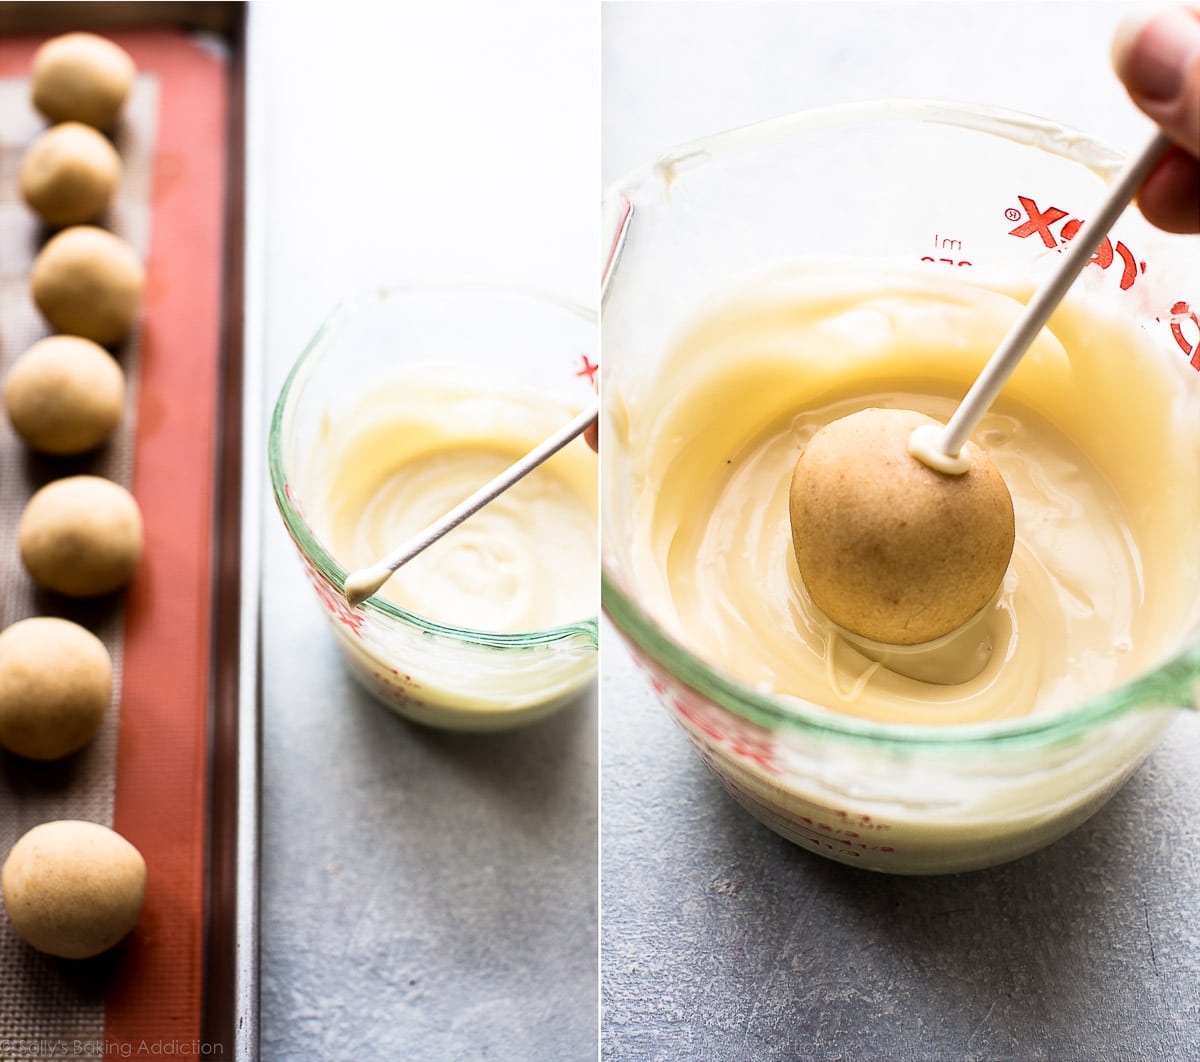 2 images of cake pop balls on a baking sheet with a lollipop stick and melted white chocolate in a glass measuring cup and dipping a cake pop on a lollipop stick into a glass measuring cup of melted white chocolate